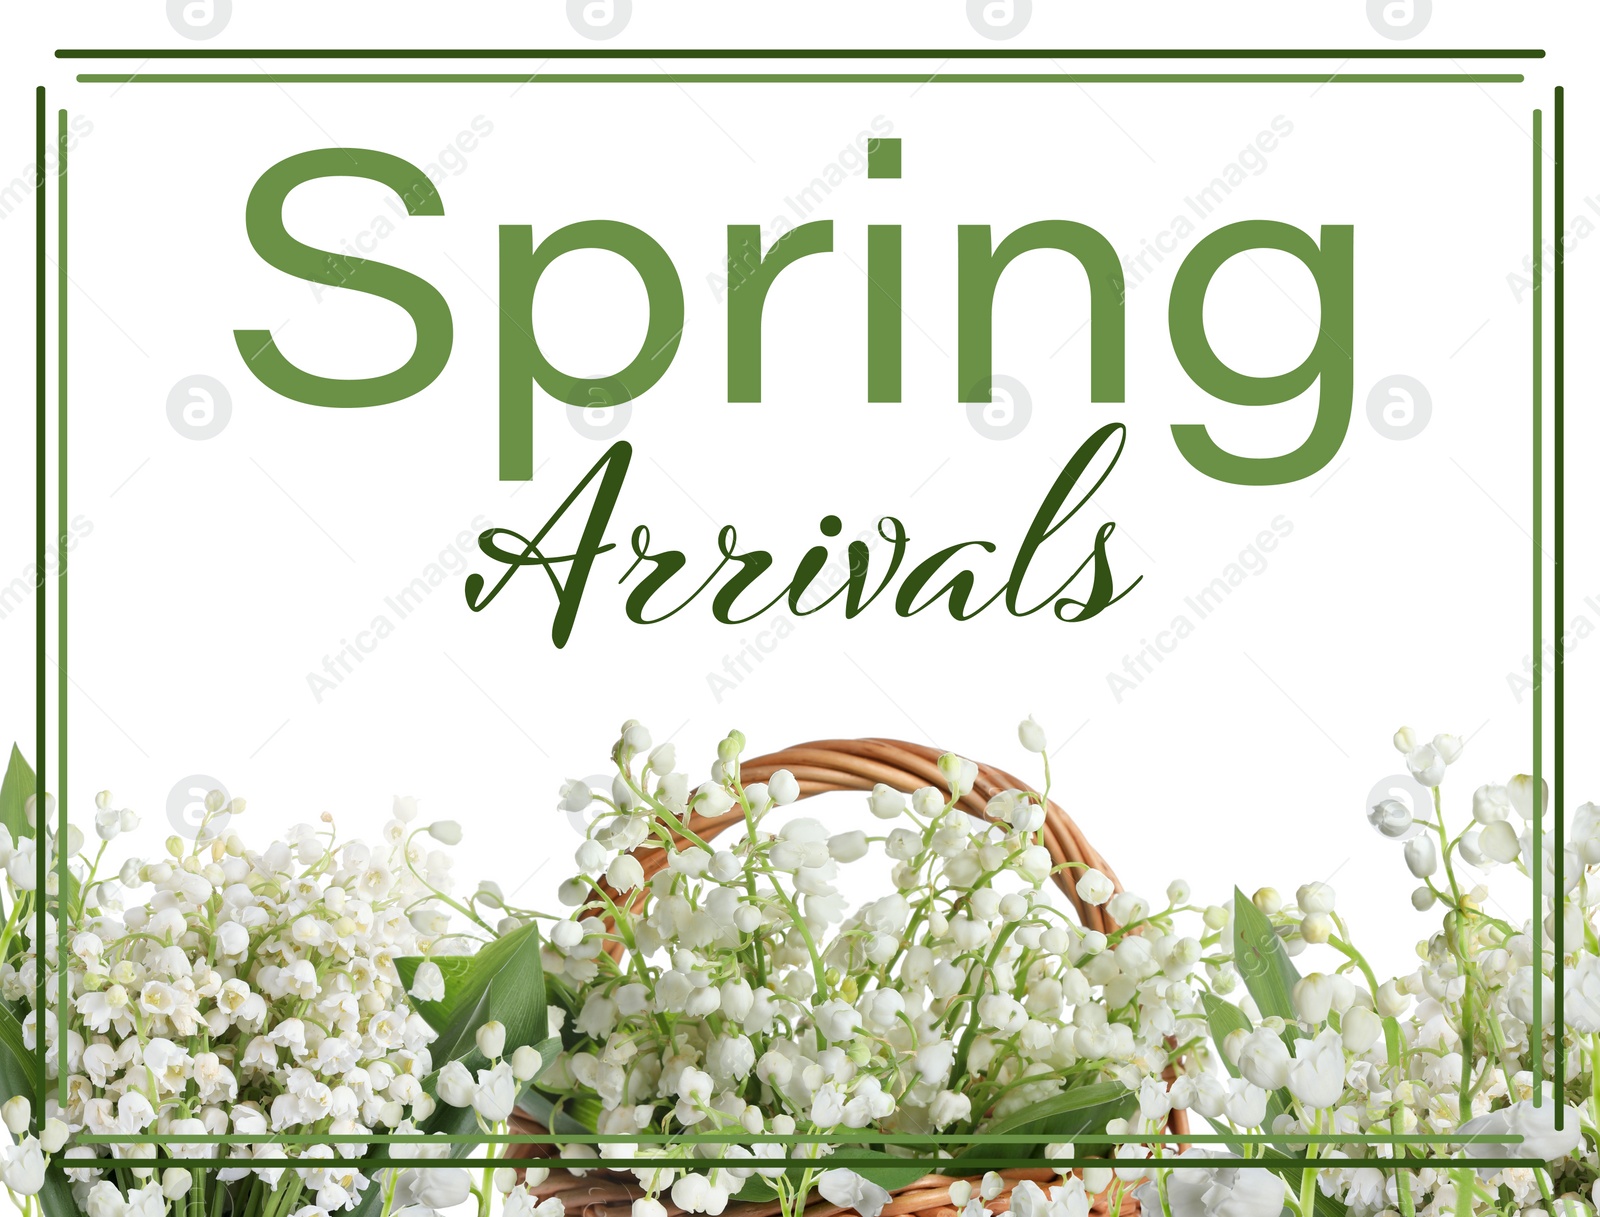 Image of Spring arrivals flyer design with beautiful flowers and text on white background